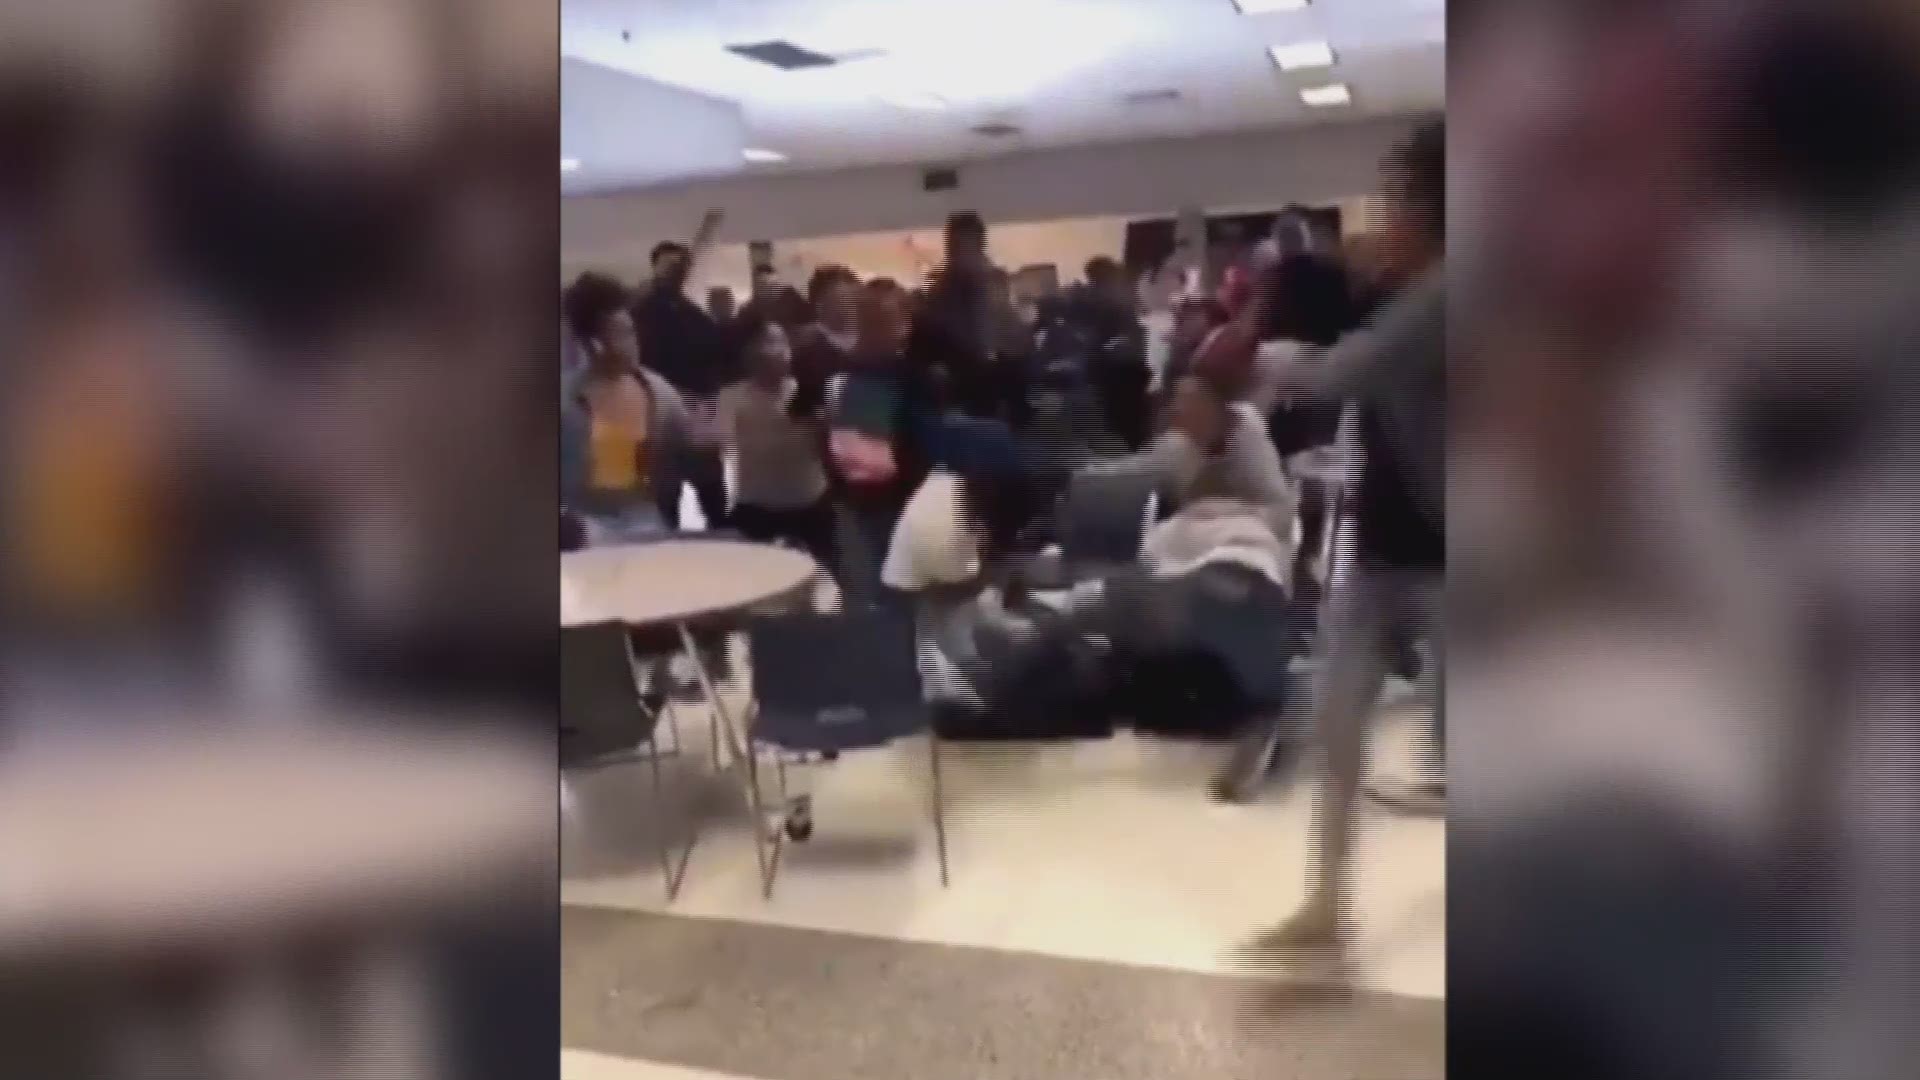 Video obtained by 13News Now shows a fight that broke out at Norview High School in Norfolk, Virginia on Feb. 5